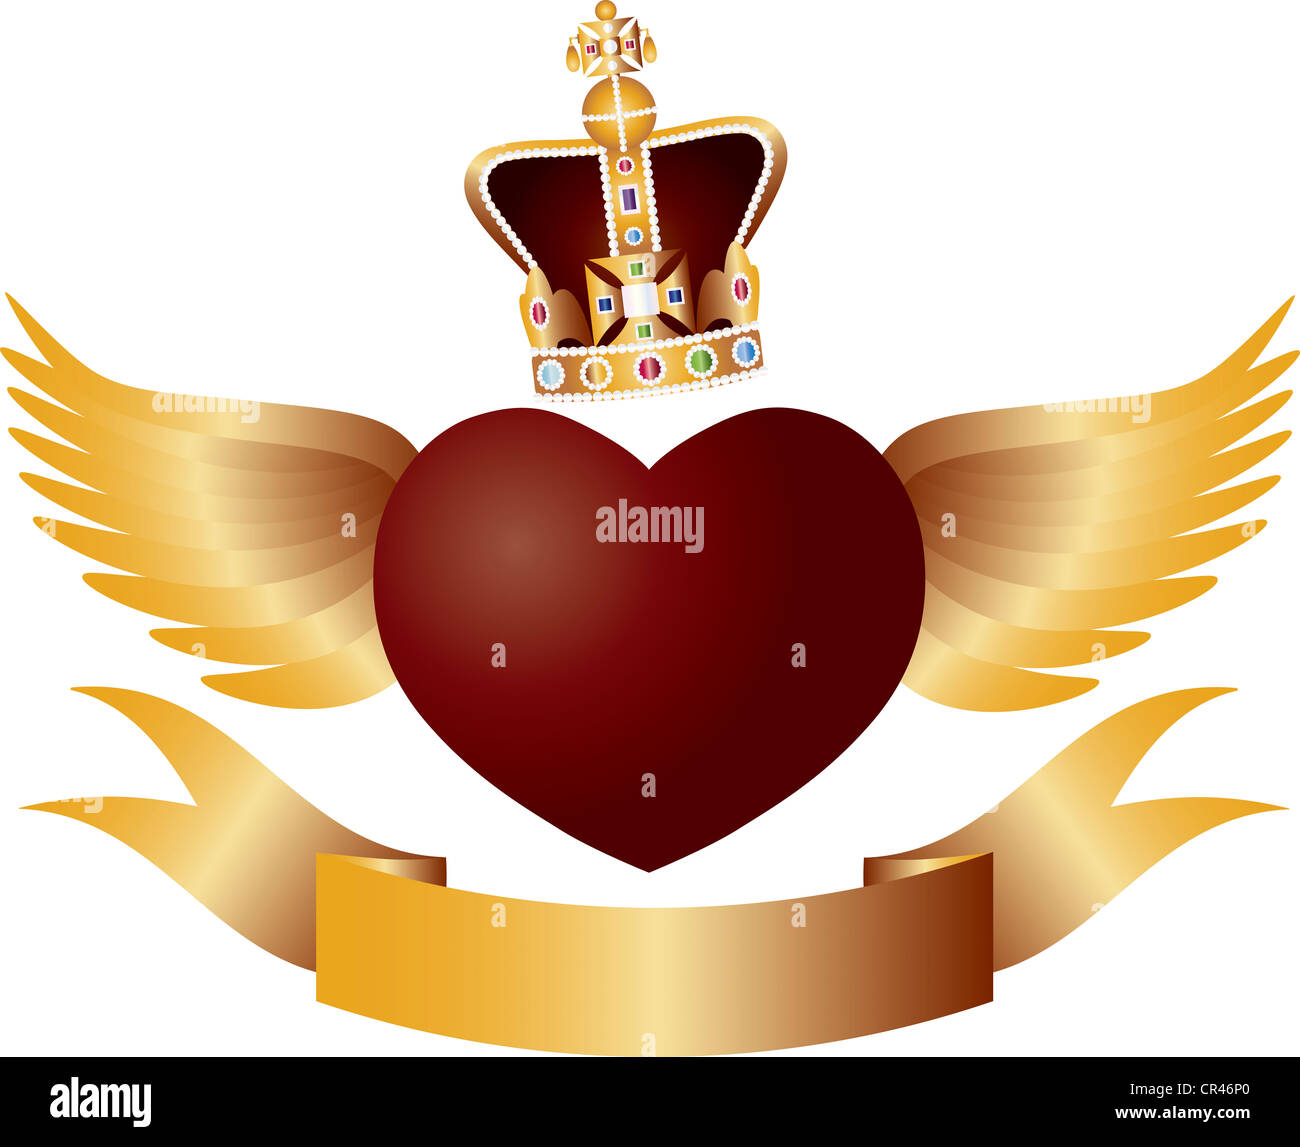 Flying Red Heart with Crown Jewels Wings and Banner Illustration Stock Photo